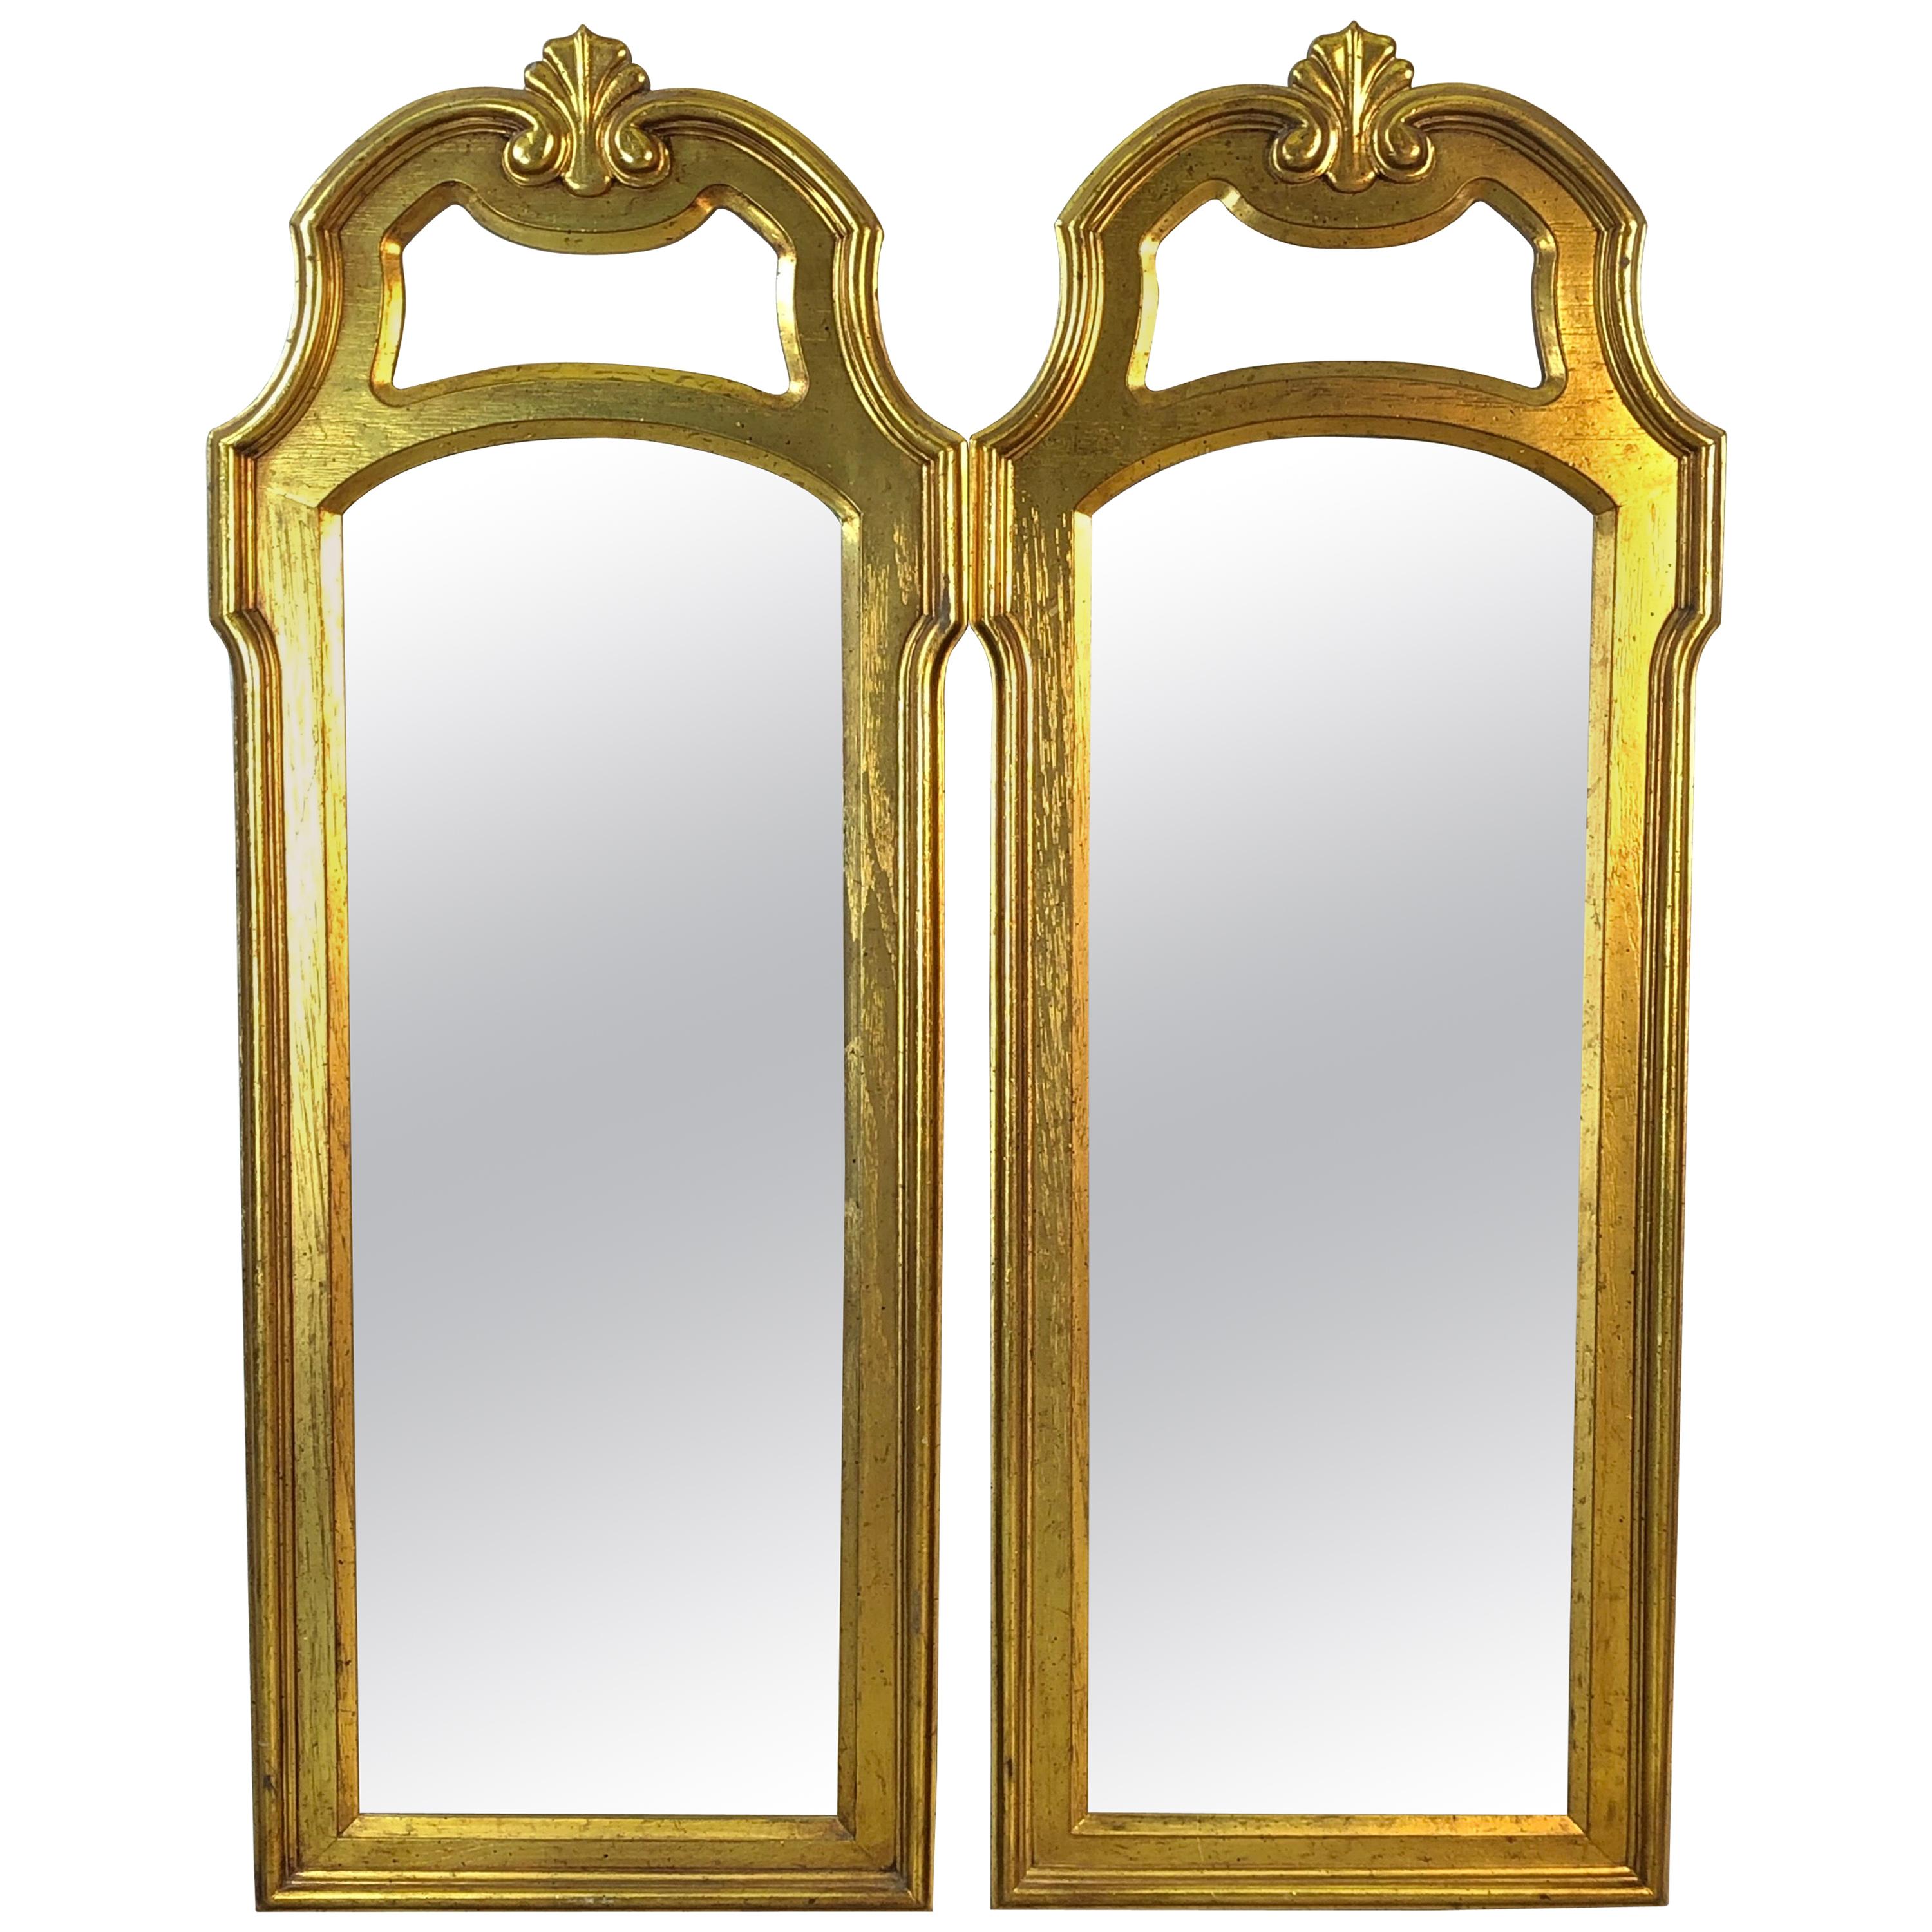 Hollywood Regency Style Gold Framed Drexel Mirrors, Pair For Sale